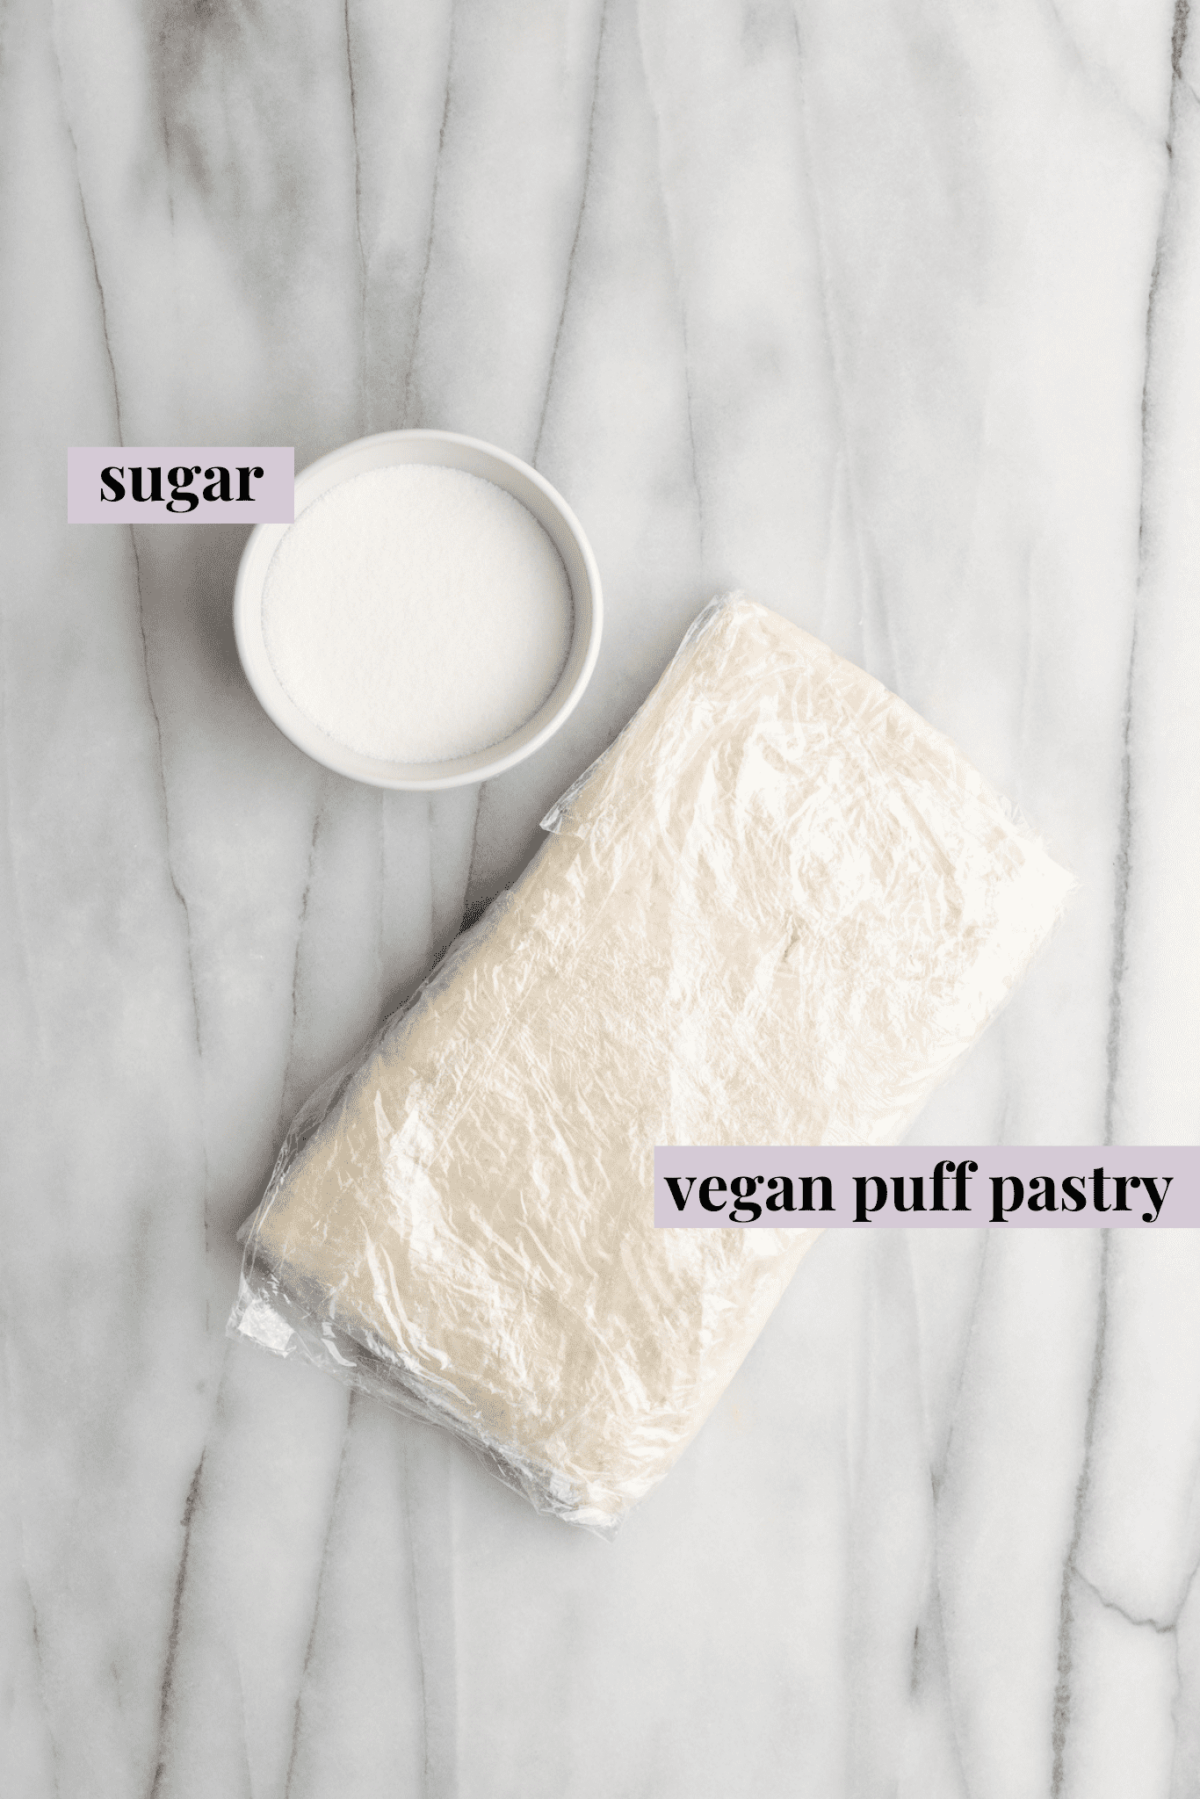 Overhead view of the labeled ingredients for vegan puff pastry palmiers: a bowl of sugar, and a piece of vegan puff pastry wrapped in plastic wrap